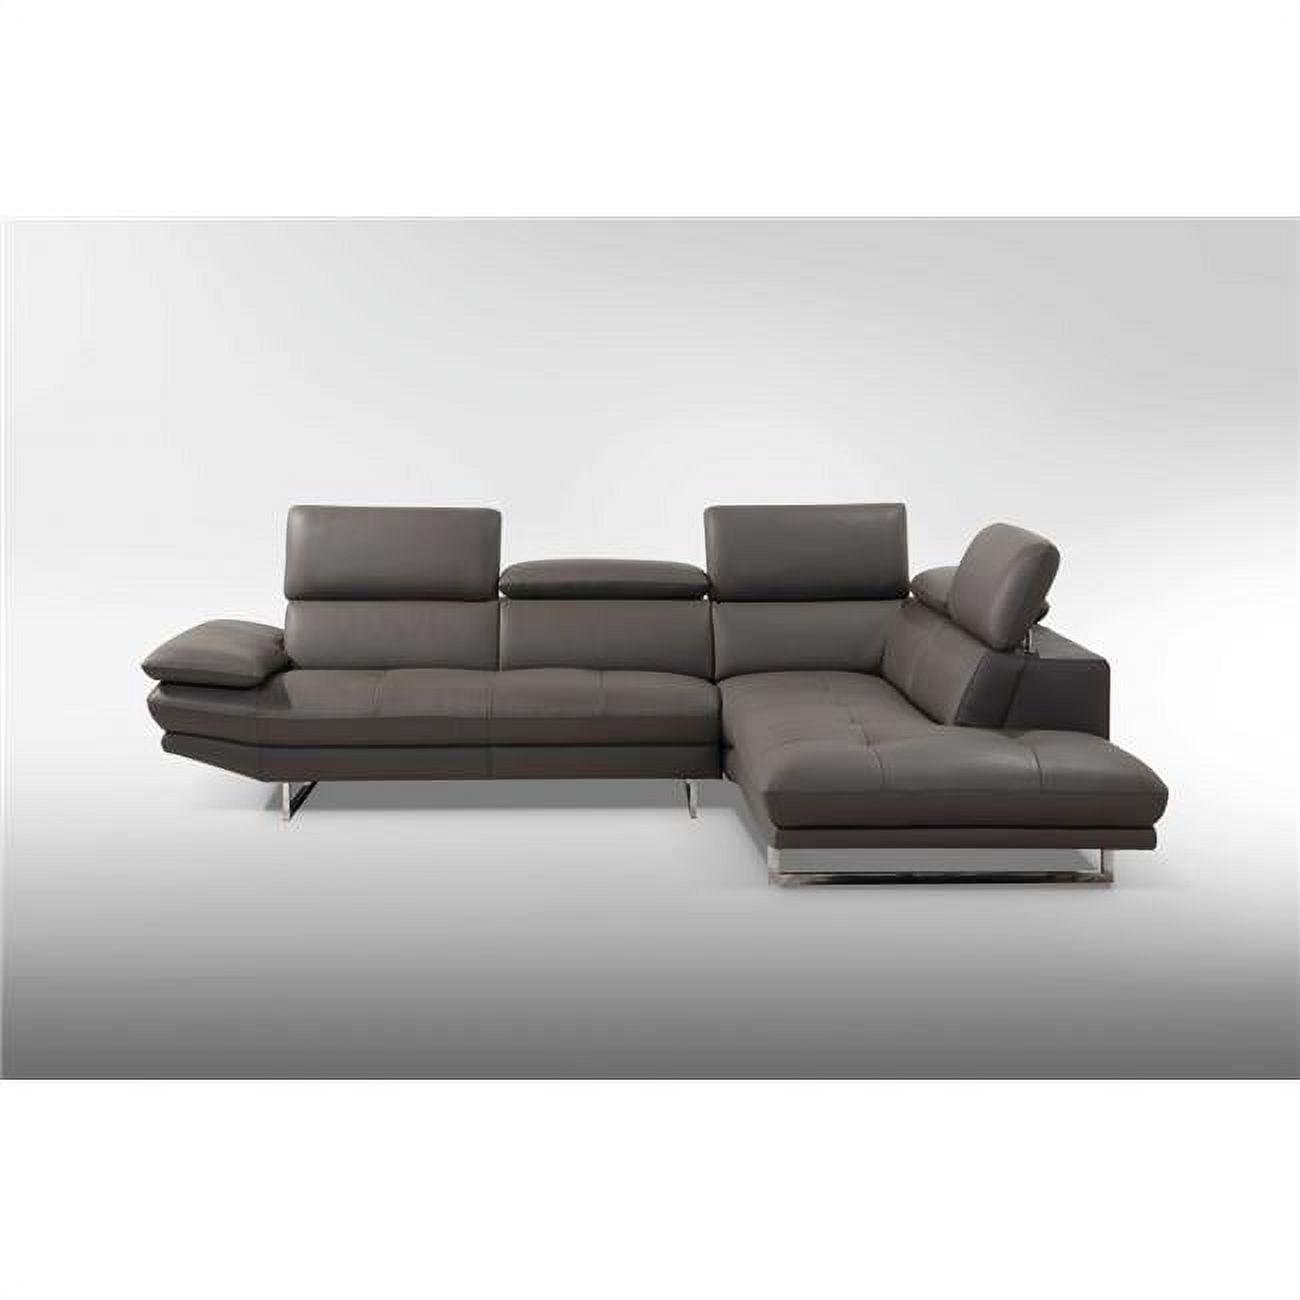 Luxe Dark Gray Faux Leather Tufted Sectional with Pillow-Top Arms